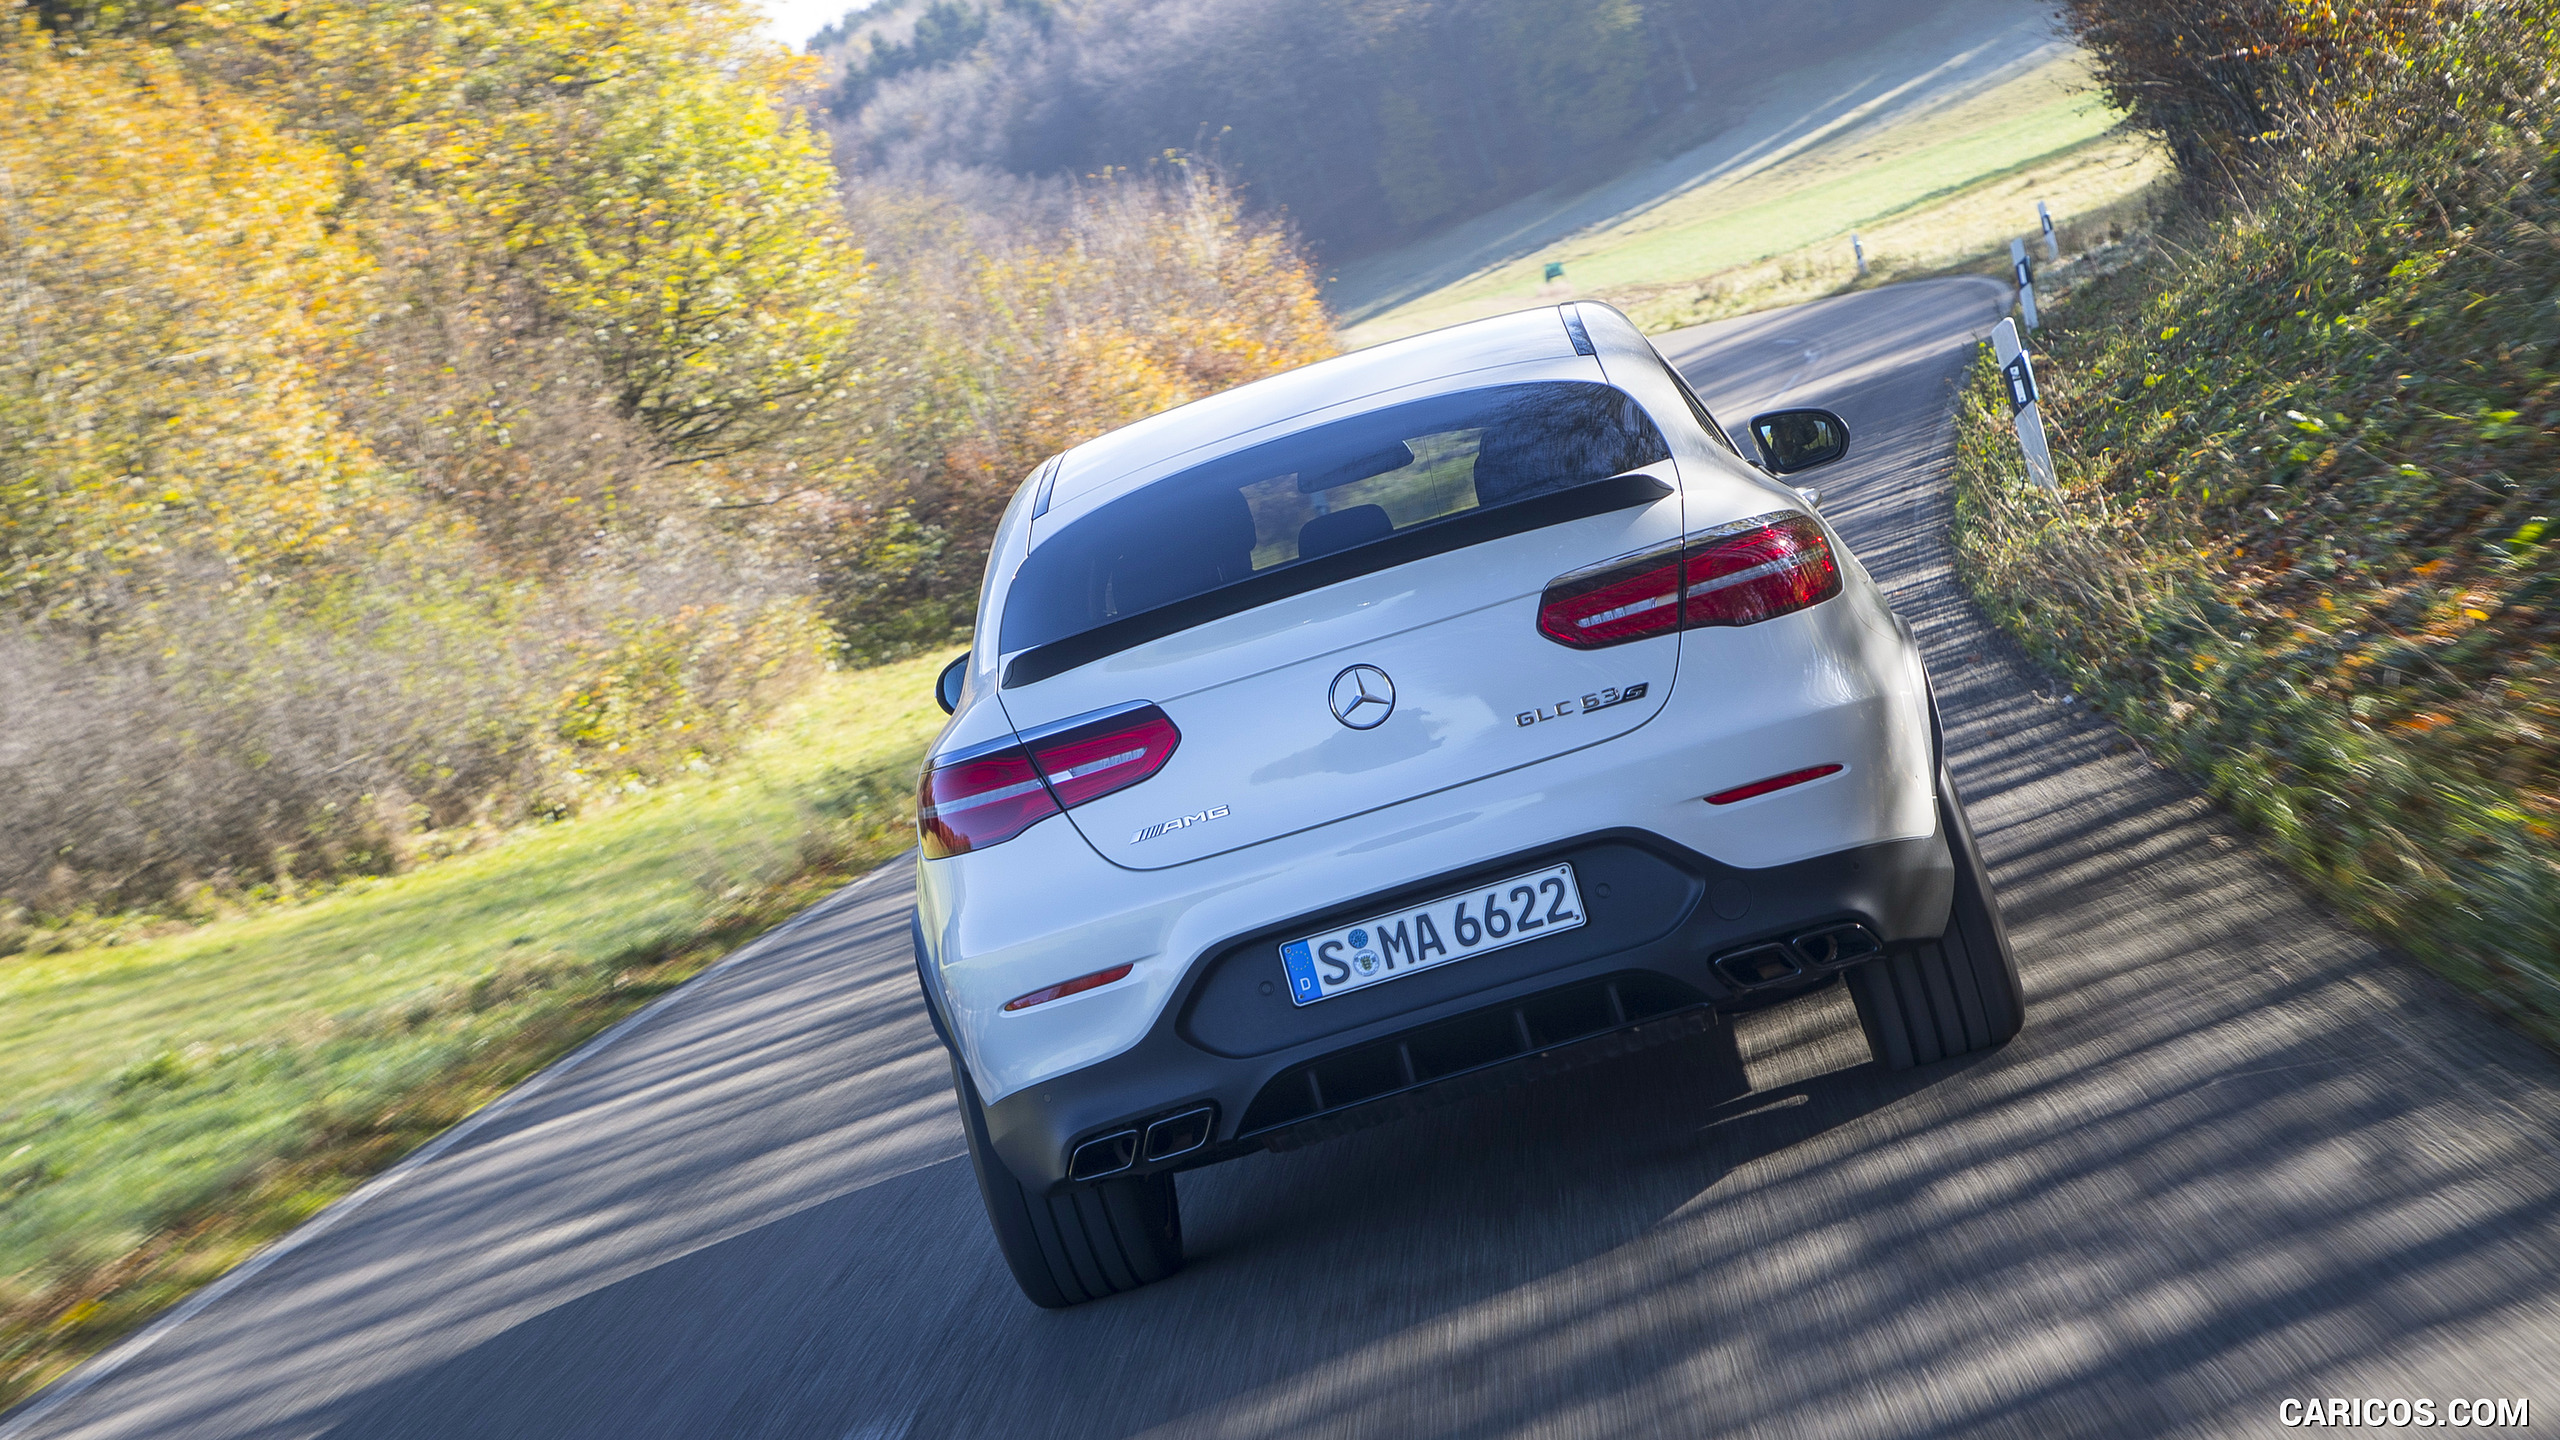 2018 Mercedes-AMG GLC 63 S Coupe - Rear, #42 of 75